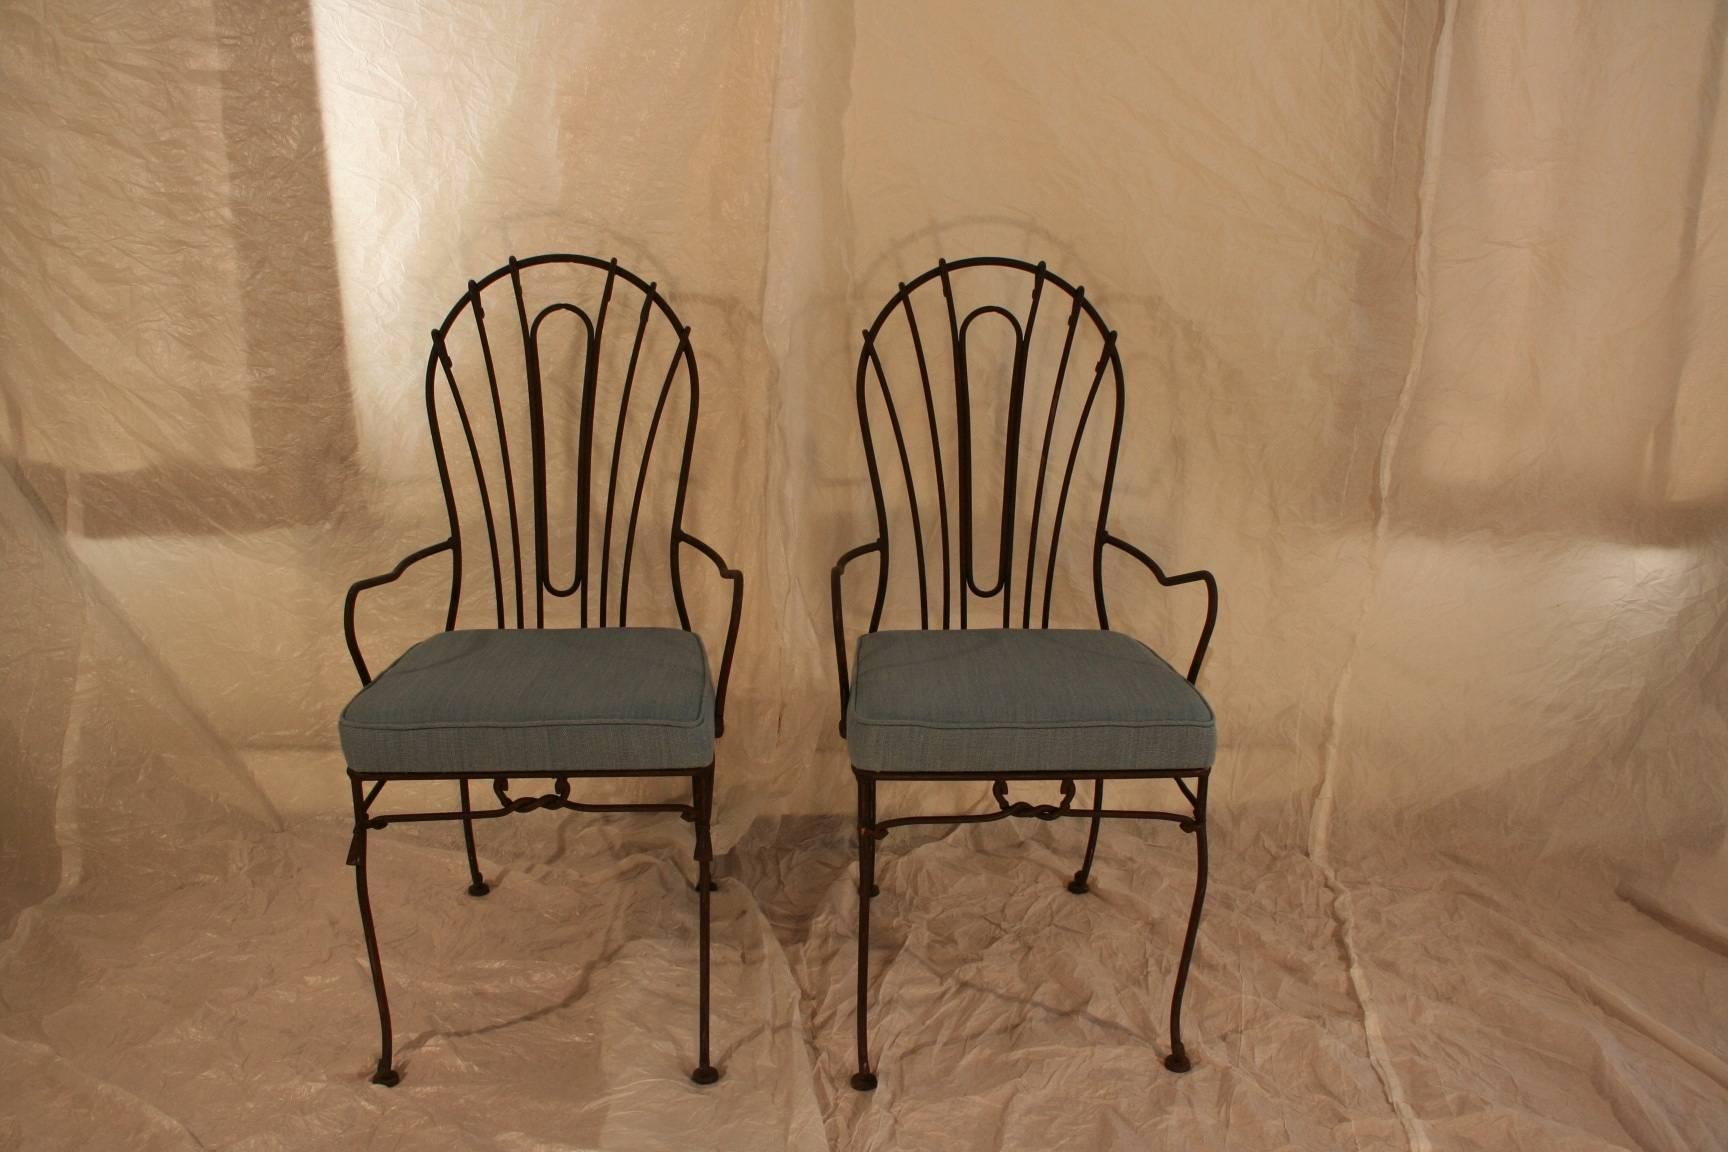 wrought iron chairs indoor